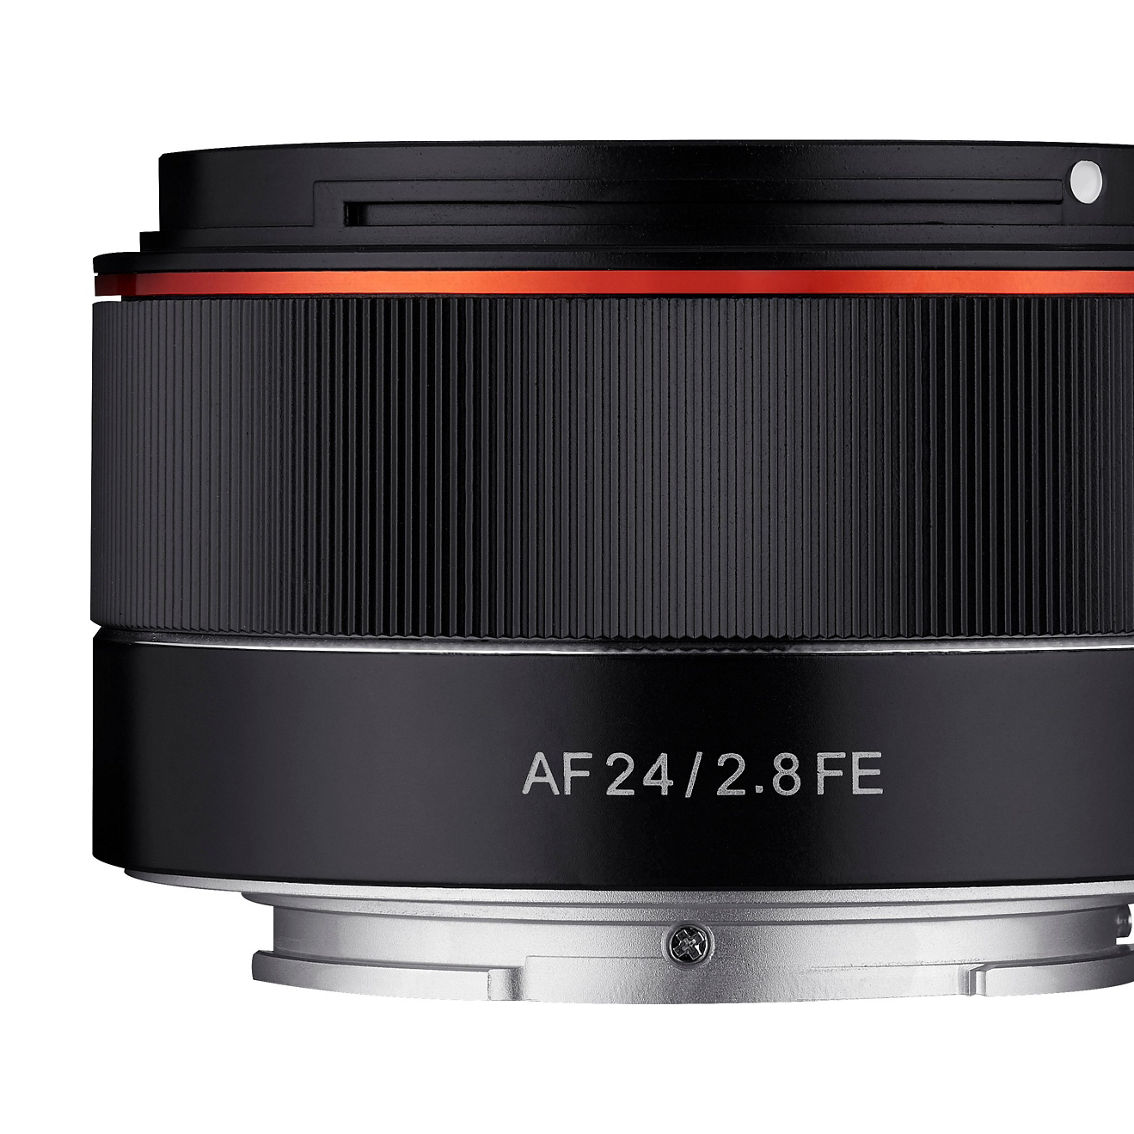 Rokinon 24mm F2.8 AF Compact Full Frame Wide Angle Lens for Sony E - Image 2 of 5